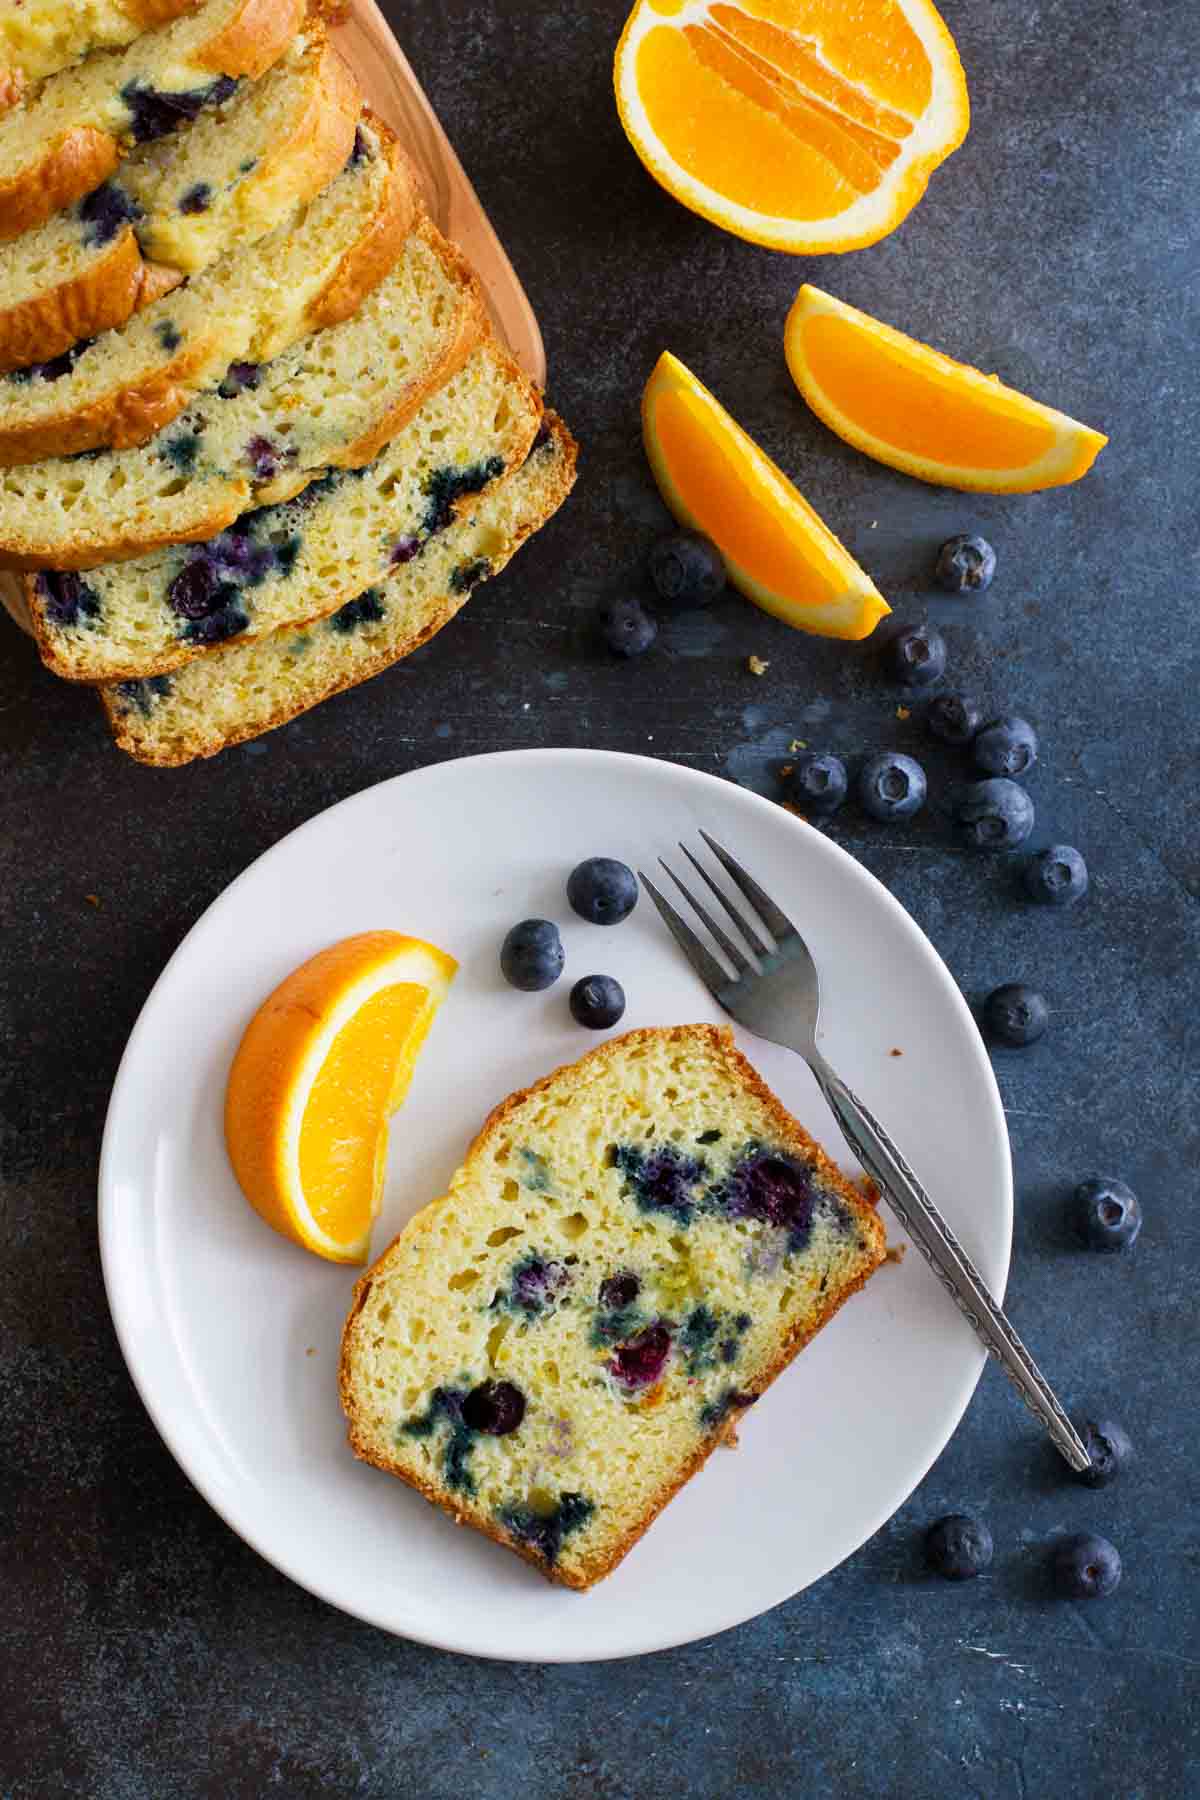 slices of Orange Blueberry Quick Bread on a plate.